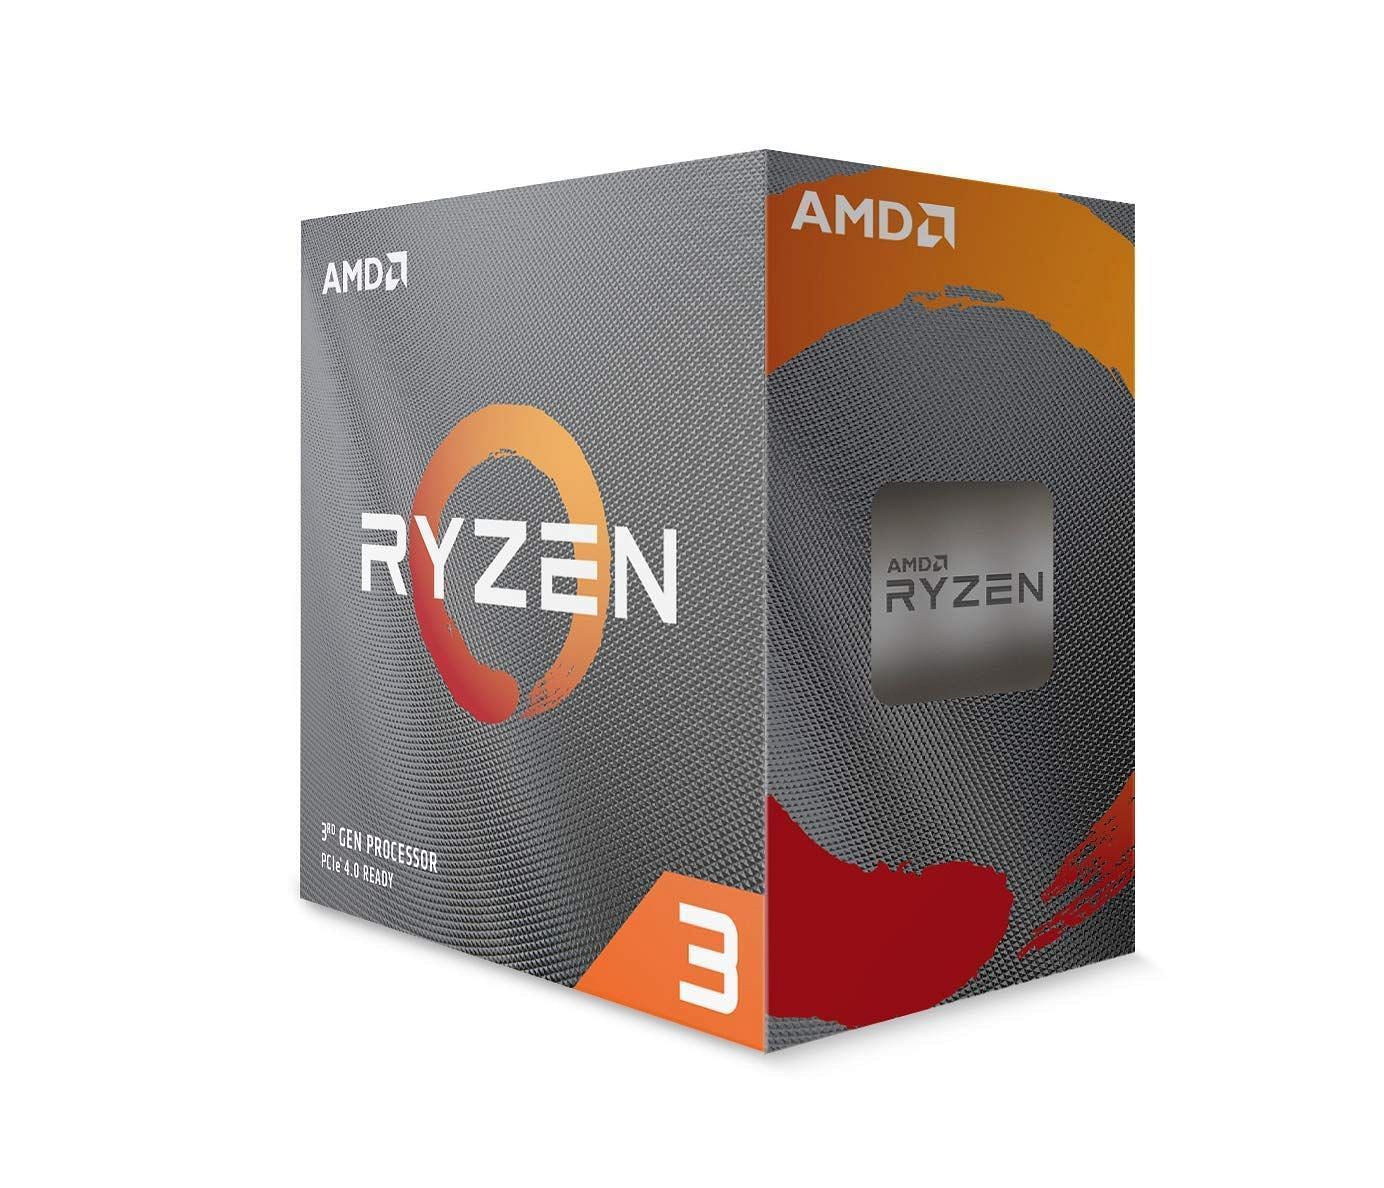 The Ryzen 3 3300x is one of the best budget CPUs on the market right now (Image via AMD)